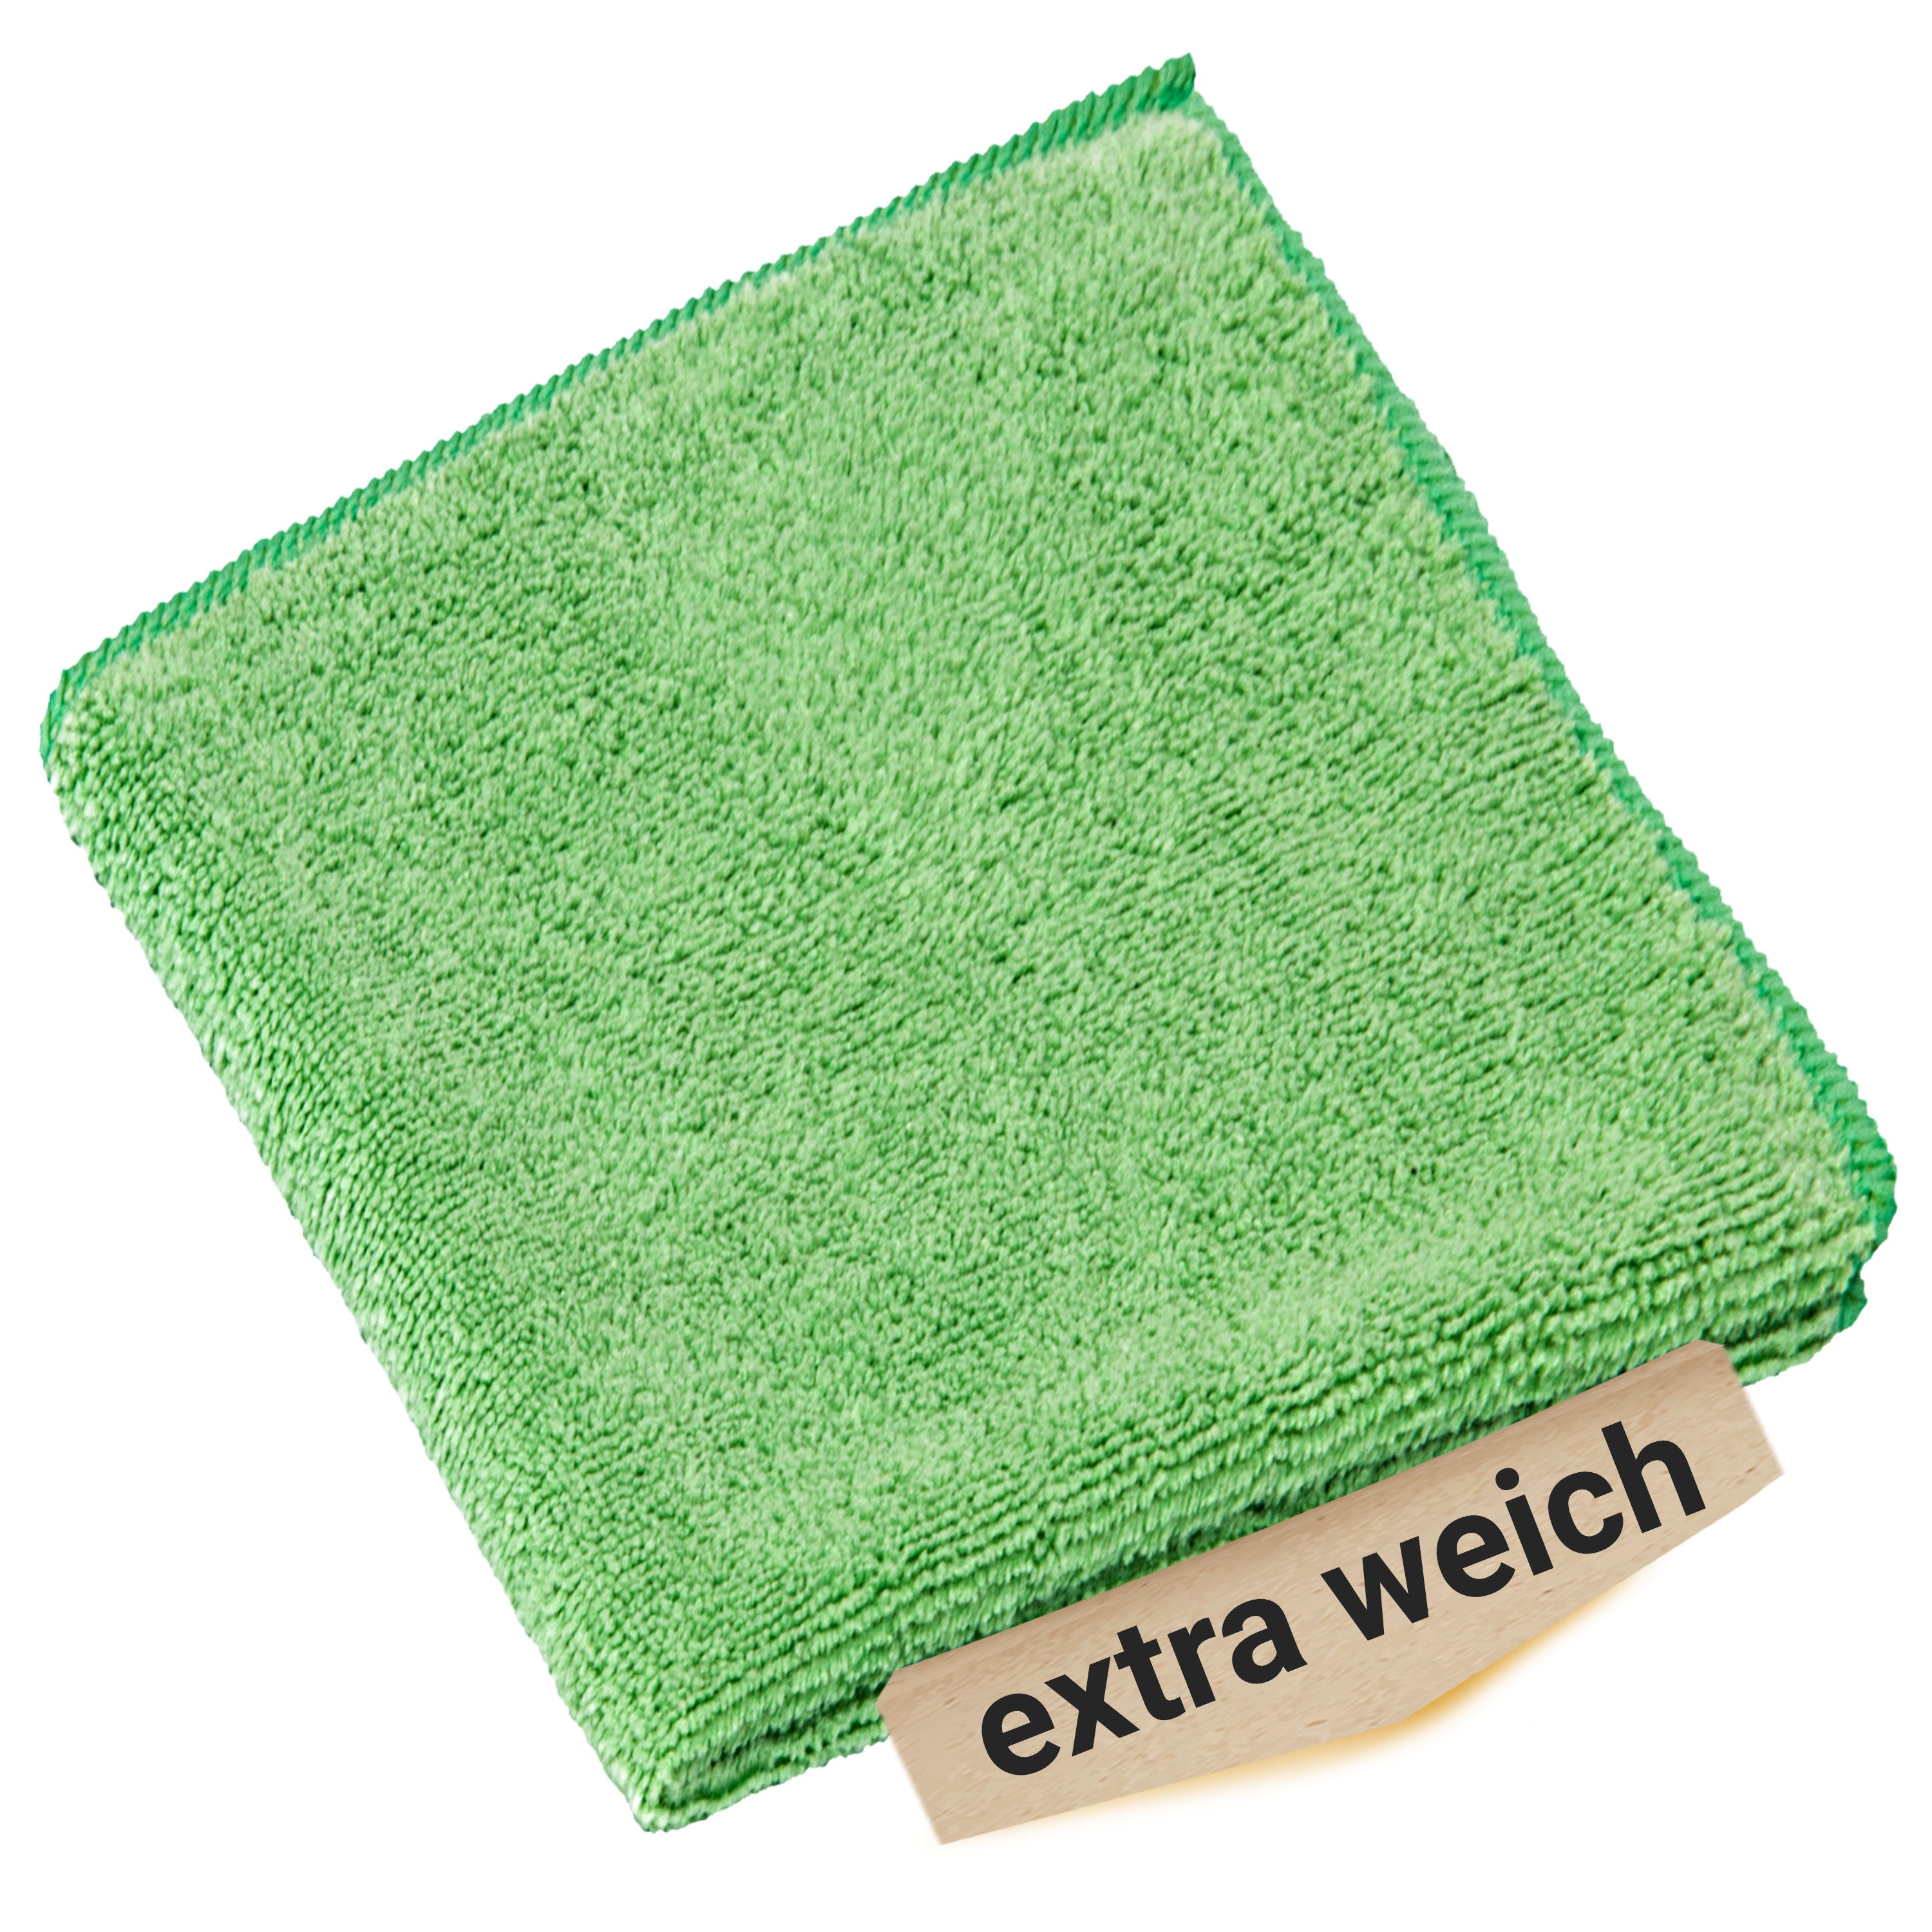 Microfiber cloth, cleaning cloth set for fine cleaning and care